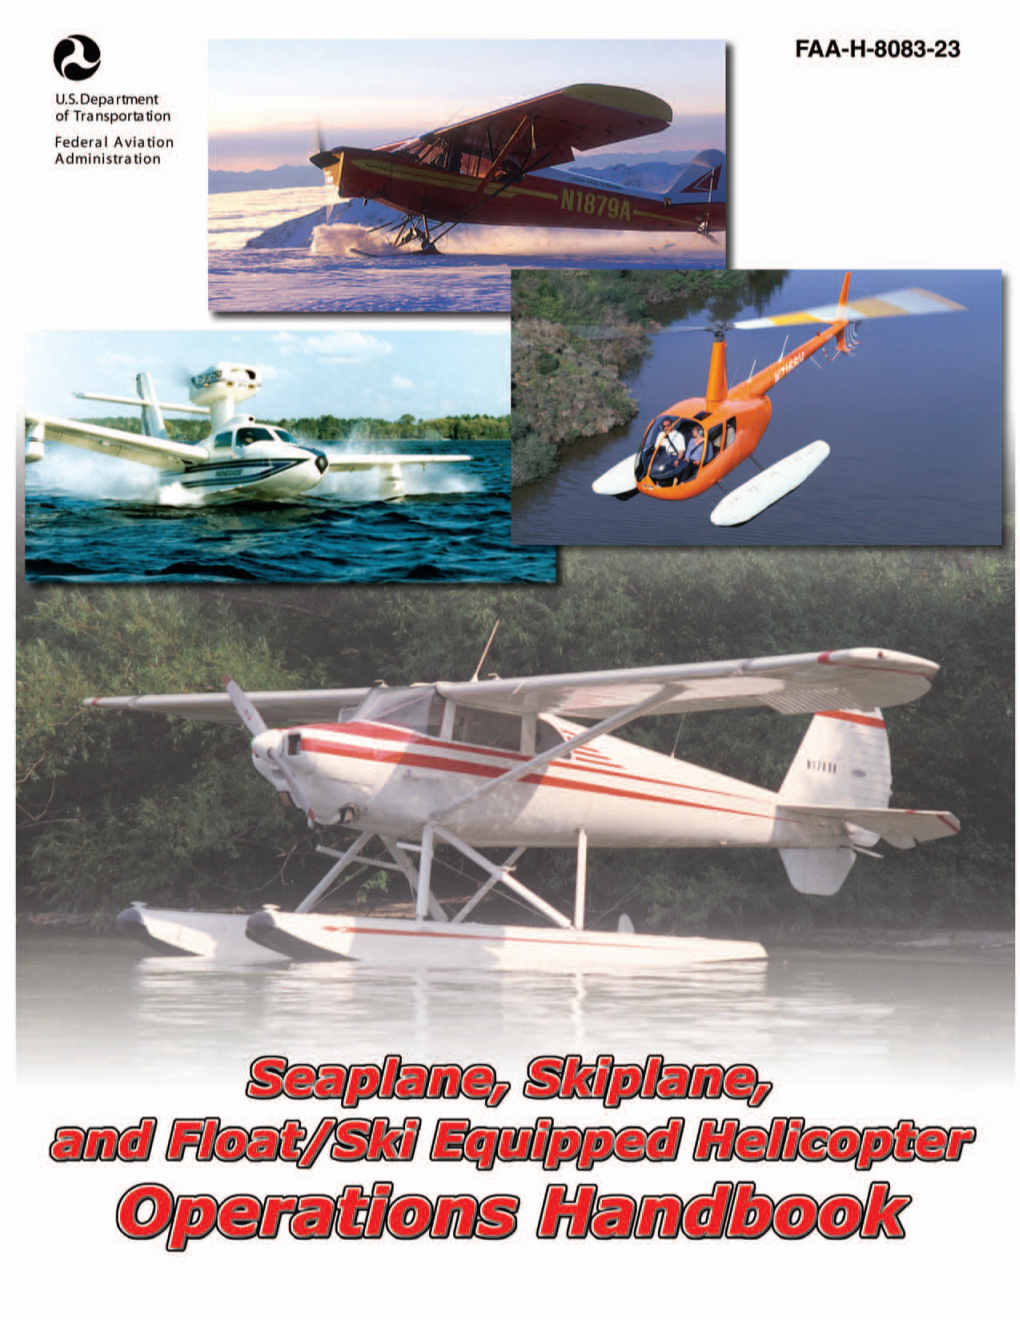 FAA-H-8083-23, Seaplane, Skiplane, and Float/Ski Equipped Helicopter